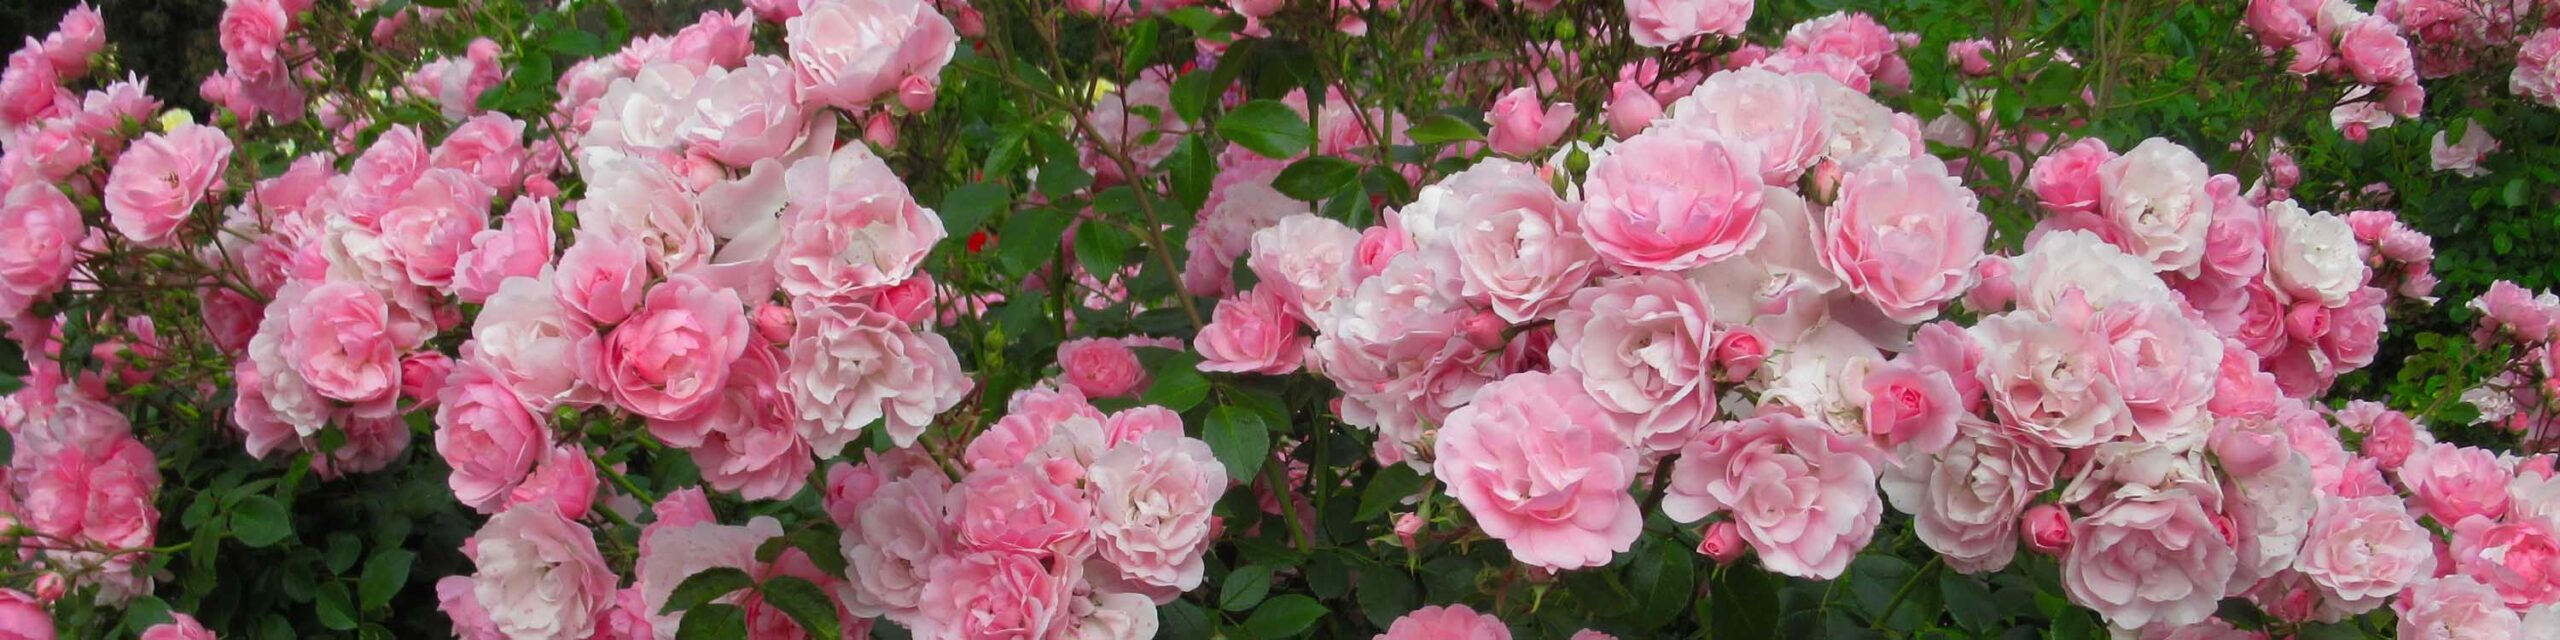 Pink roses growing on a vine.